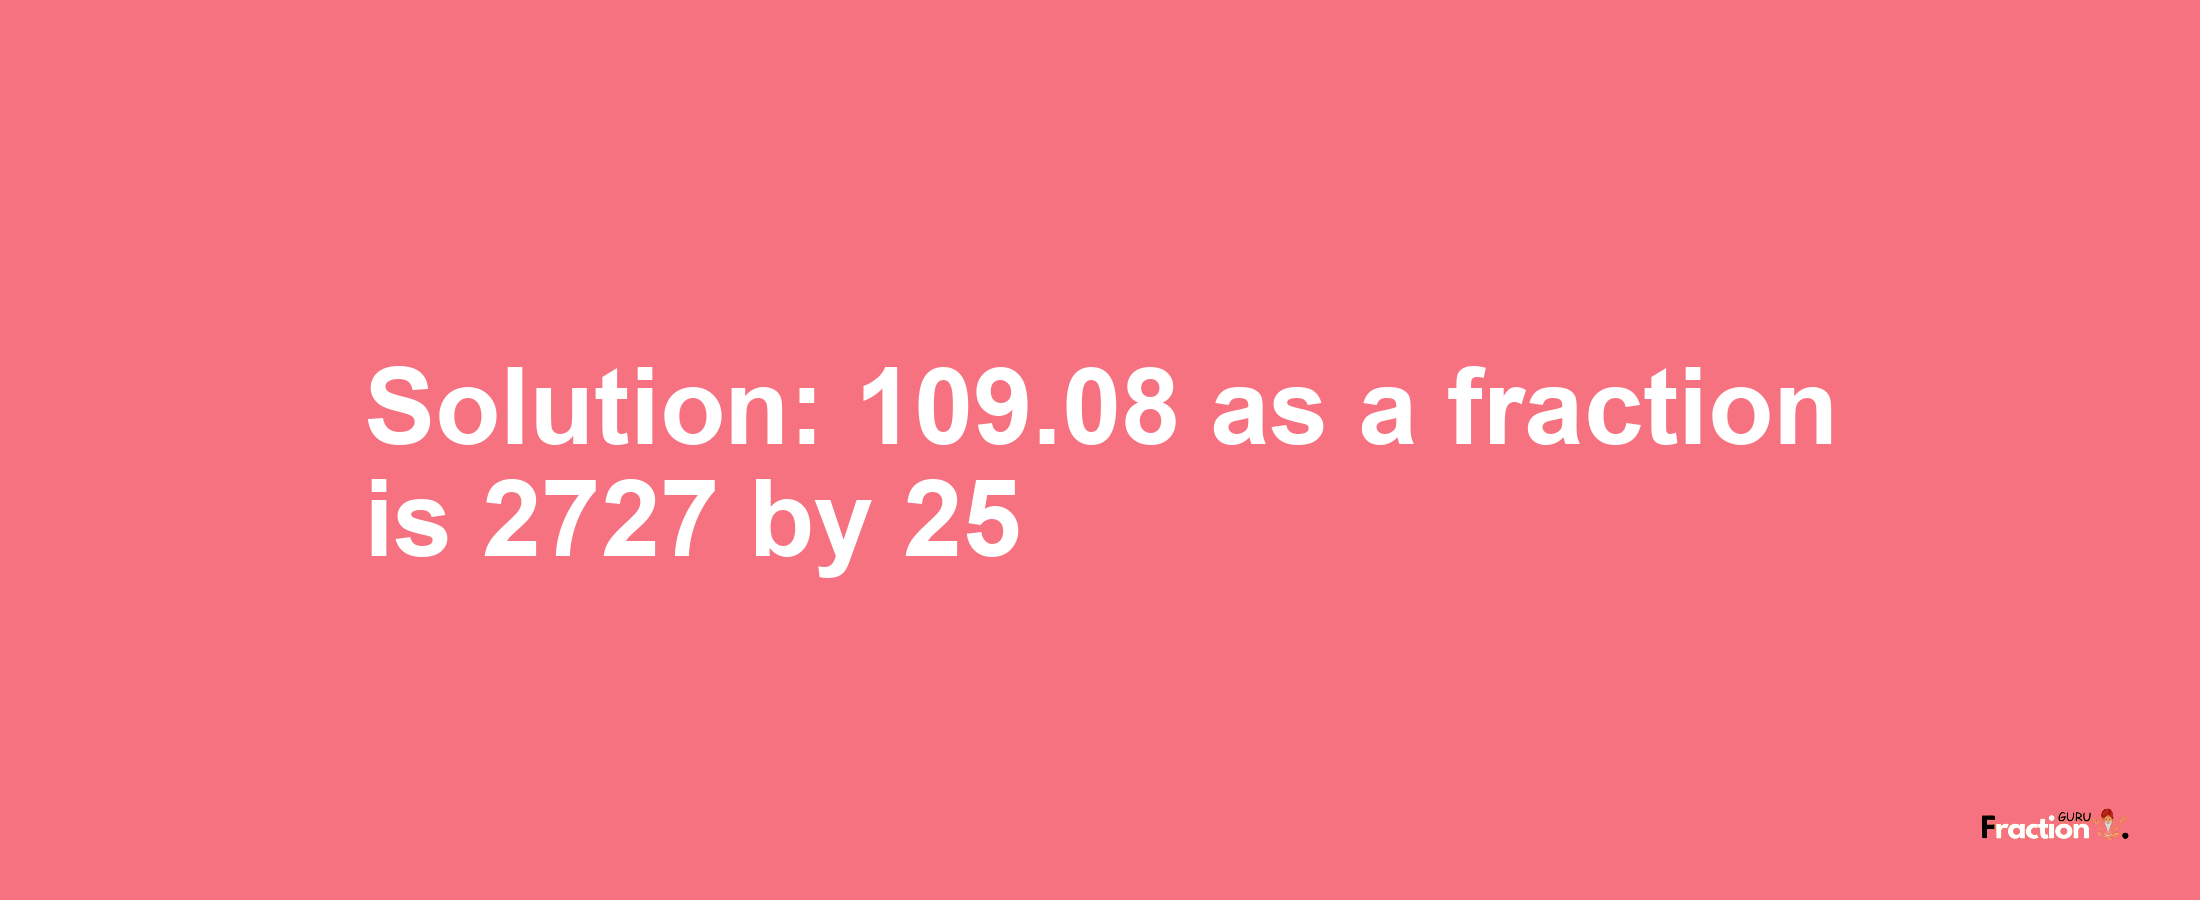 Solution:109.08 as a fraction is 2727/25